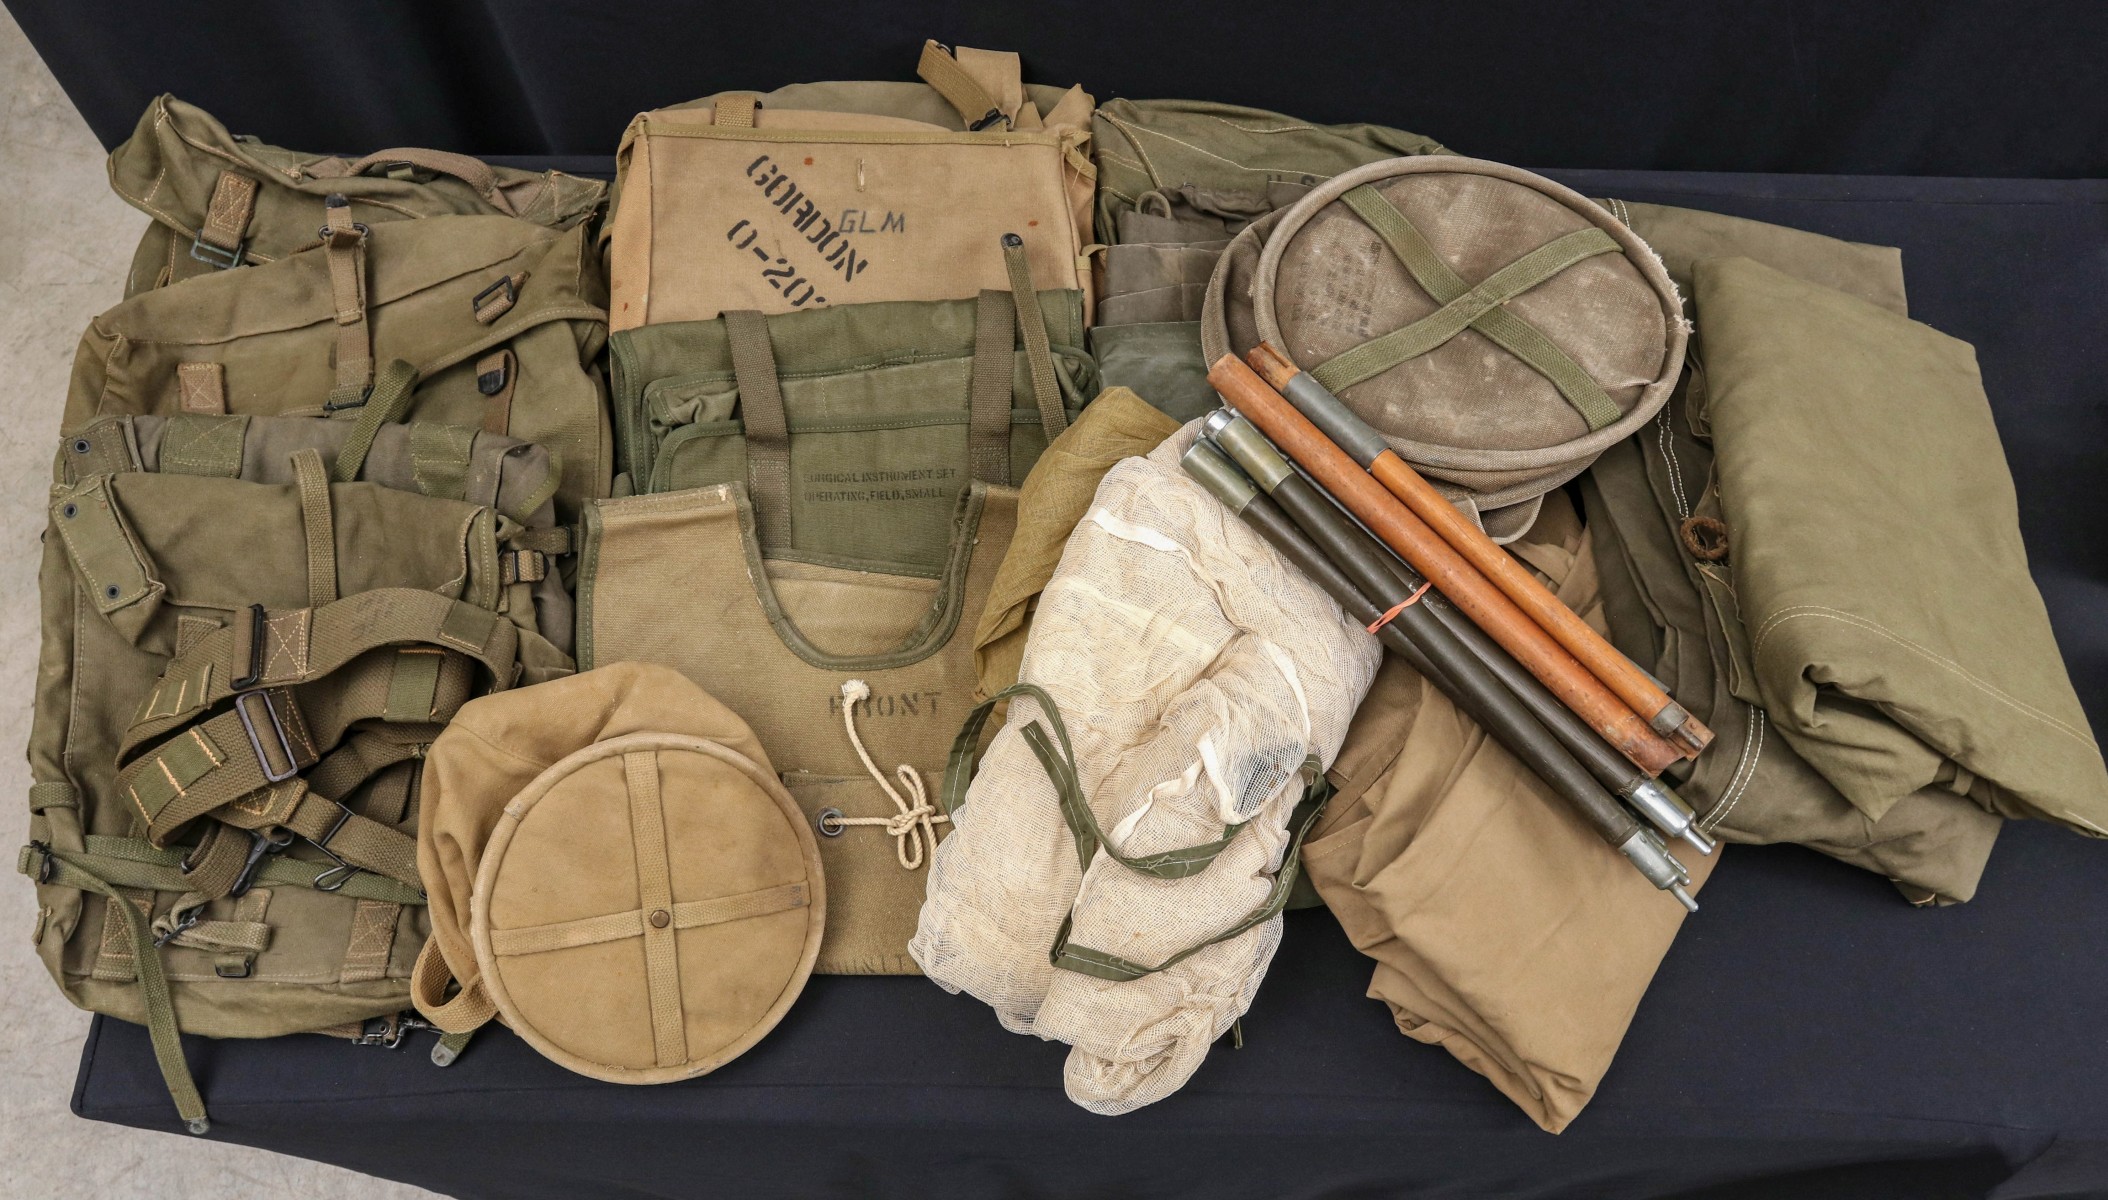 US WWII AND OTHER FIELD GEAR, TENT, AMMO BAGS ETC